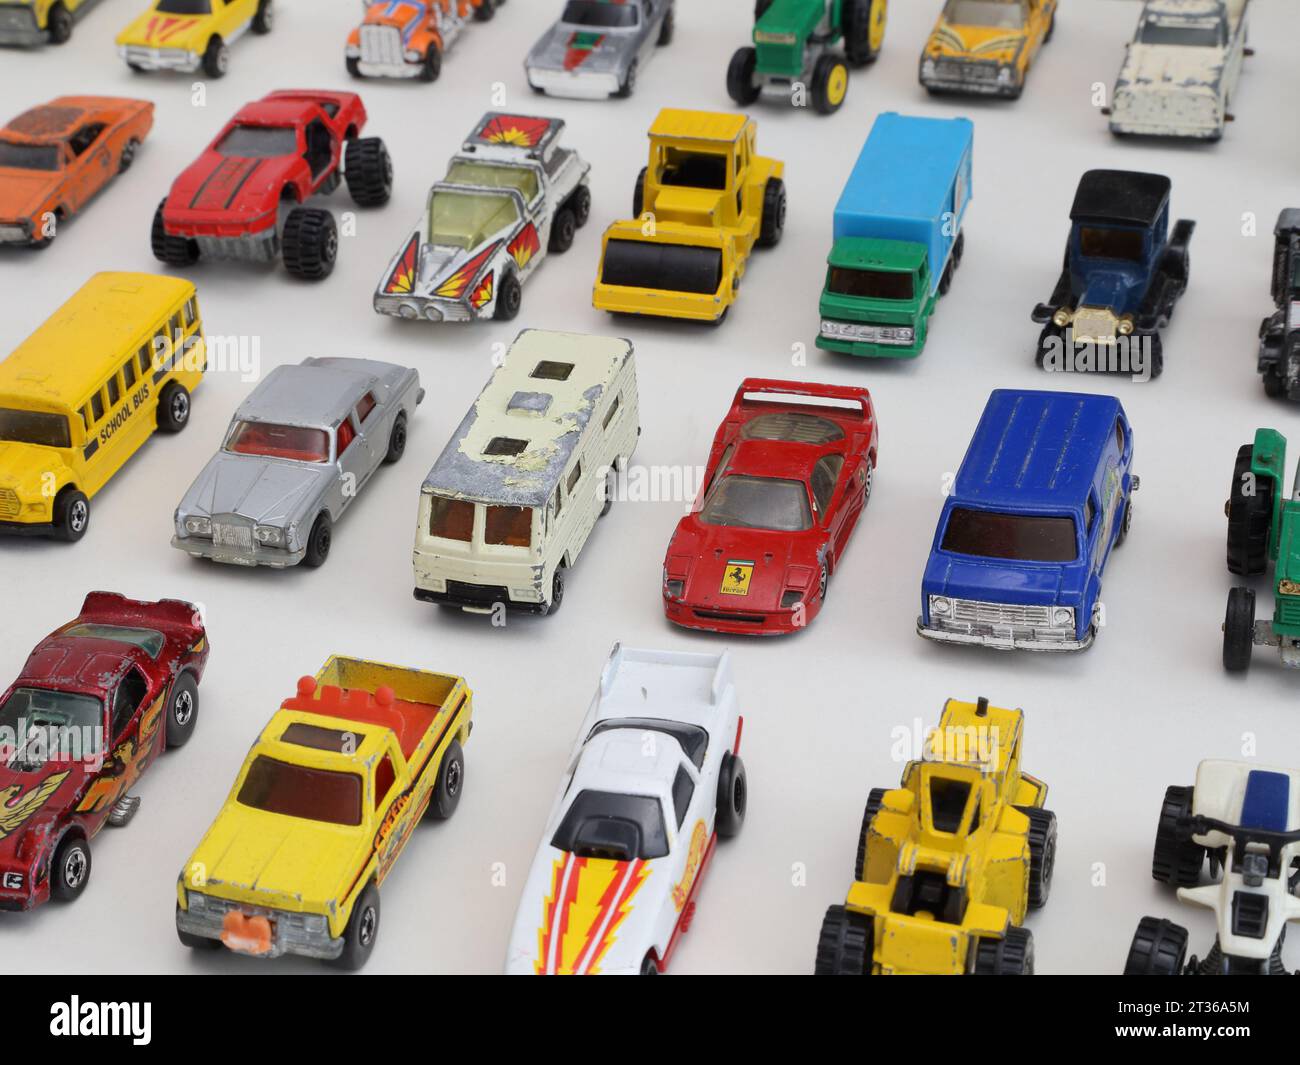 Los Angeles, California / USA - May 4, 2023: Many old and worn Hotel Wheels and Matchbox vintage toy vehicles are shown on display. Stock Photo